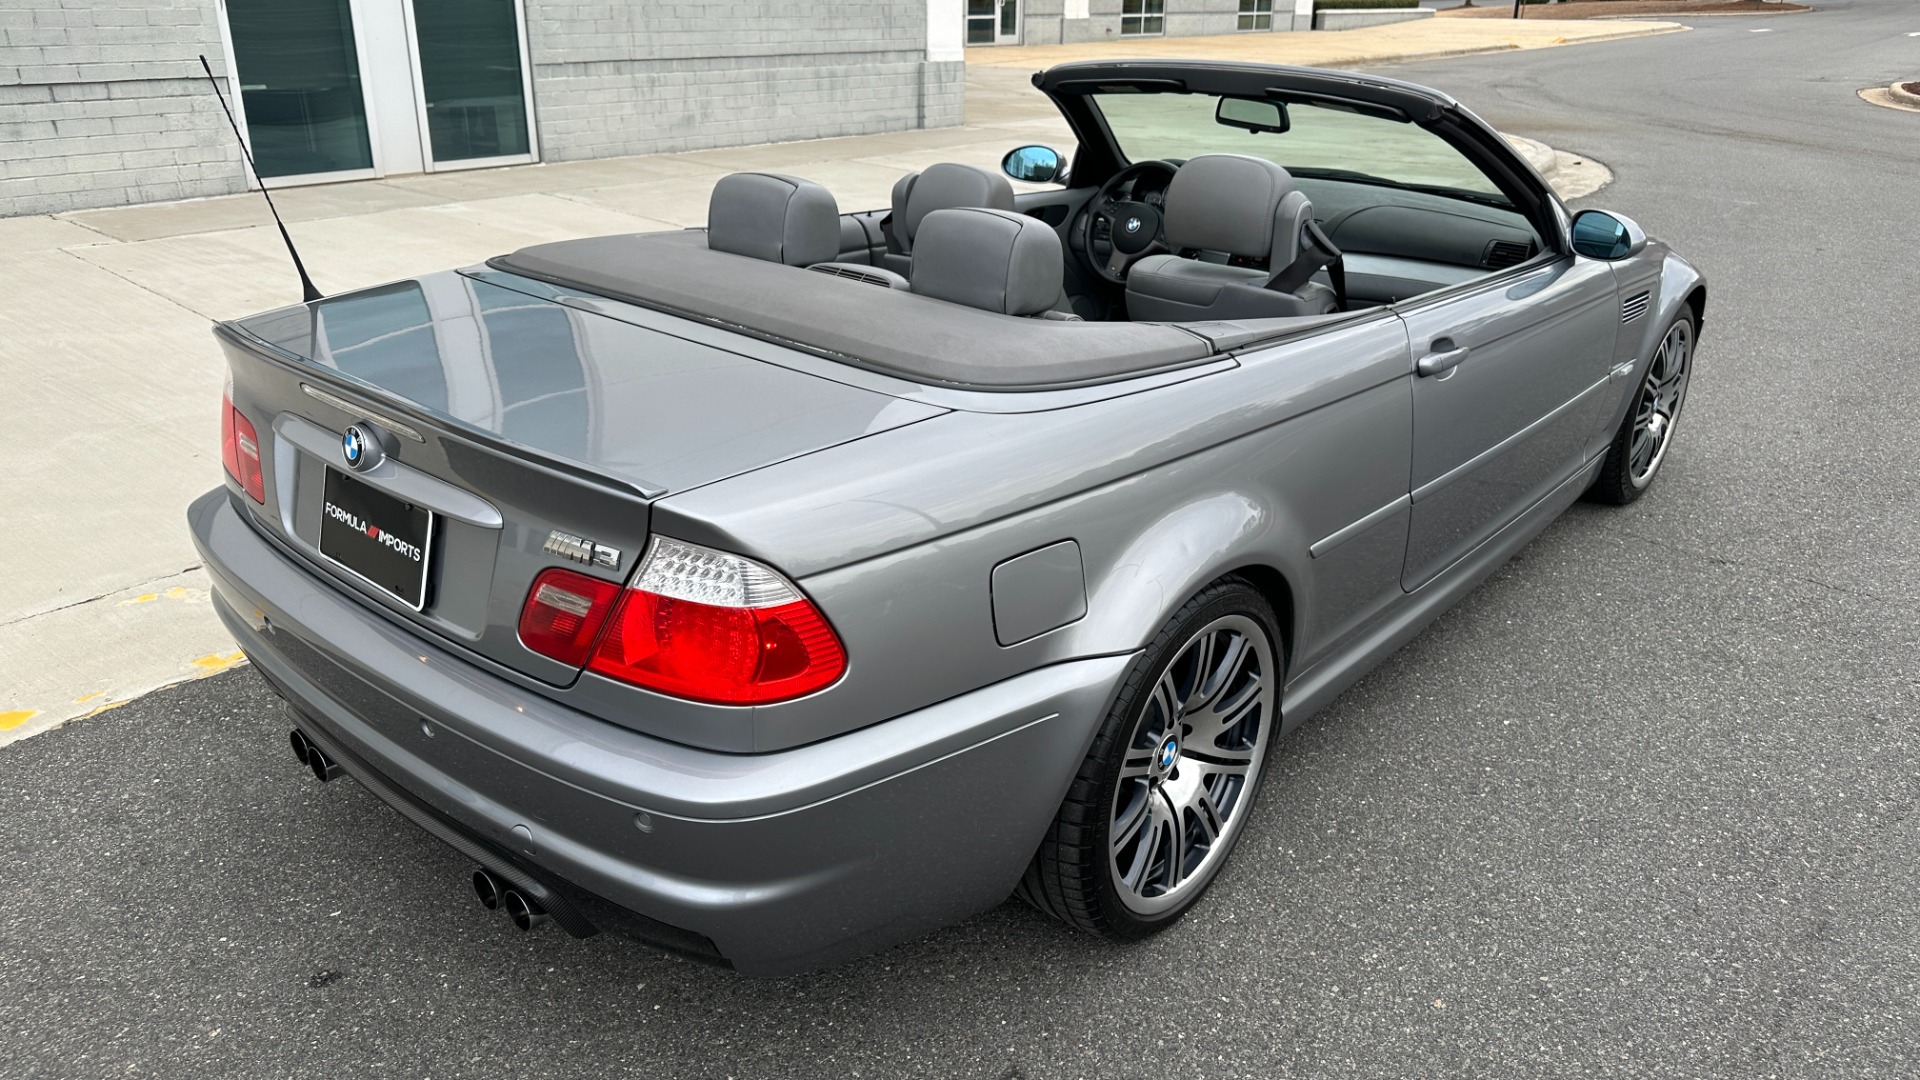 Used 2006 BMW 3 Series M3 CONVERTIBLE / SMG AUTO / LEATHER / INLINE 6CYL / CARBON FIBER for sale Sold at Formula Imports in Charlotte NC 28227 4